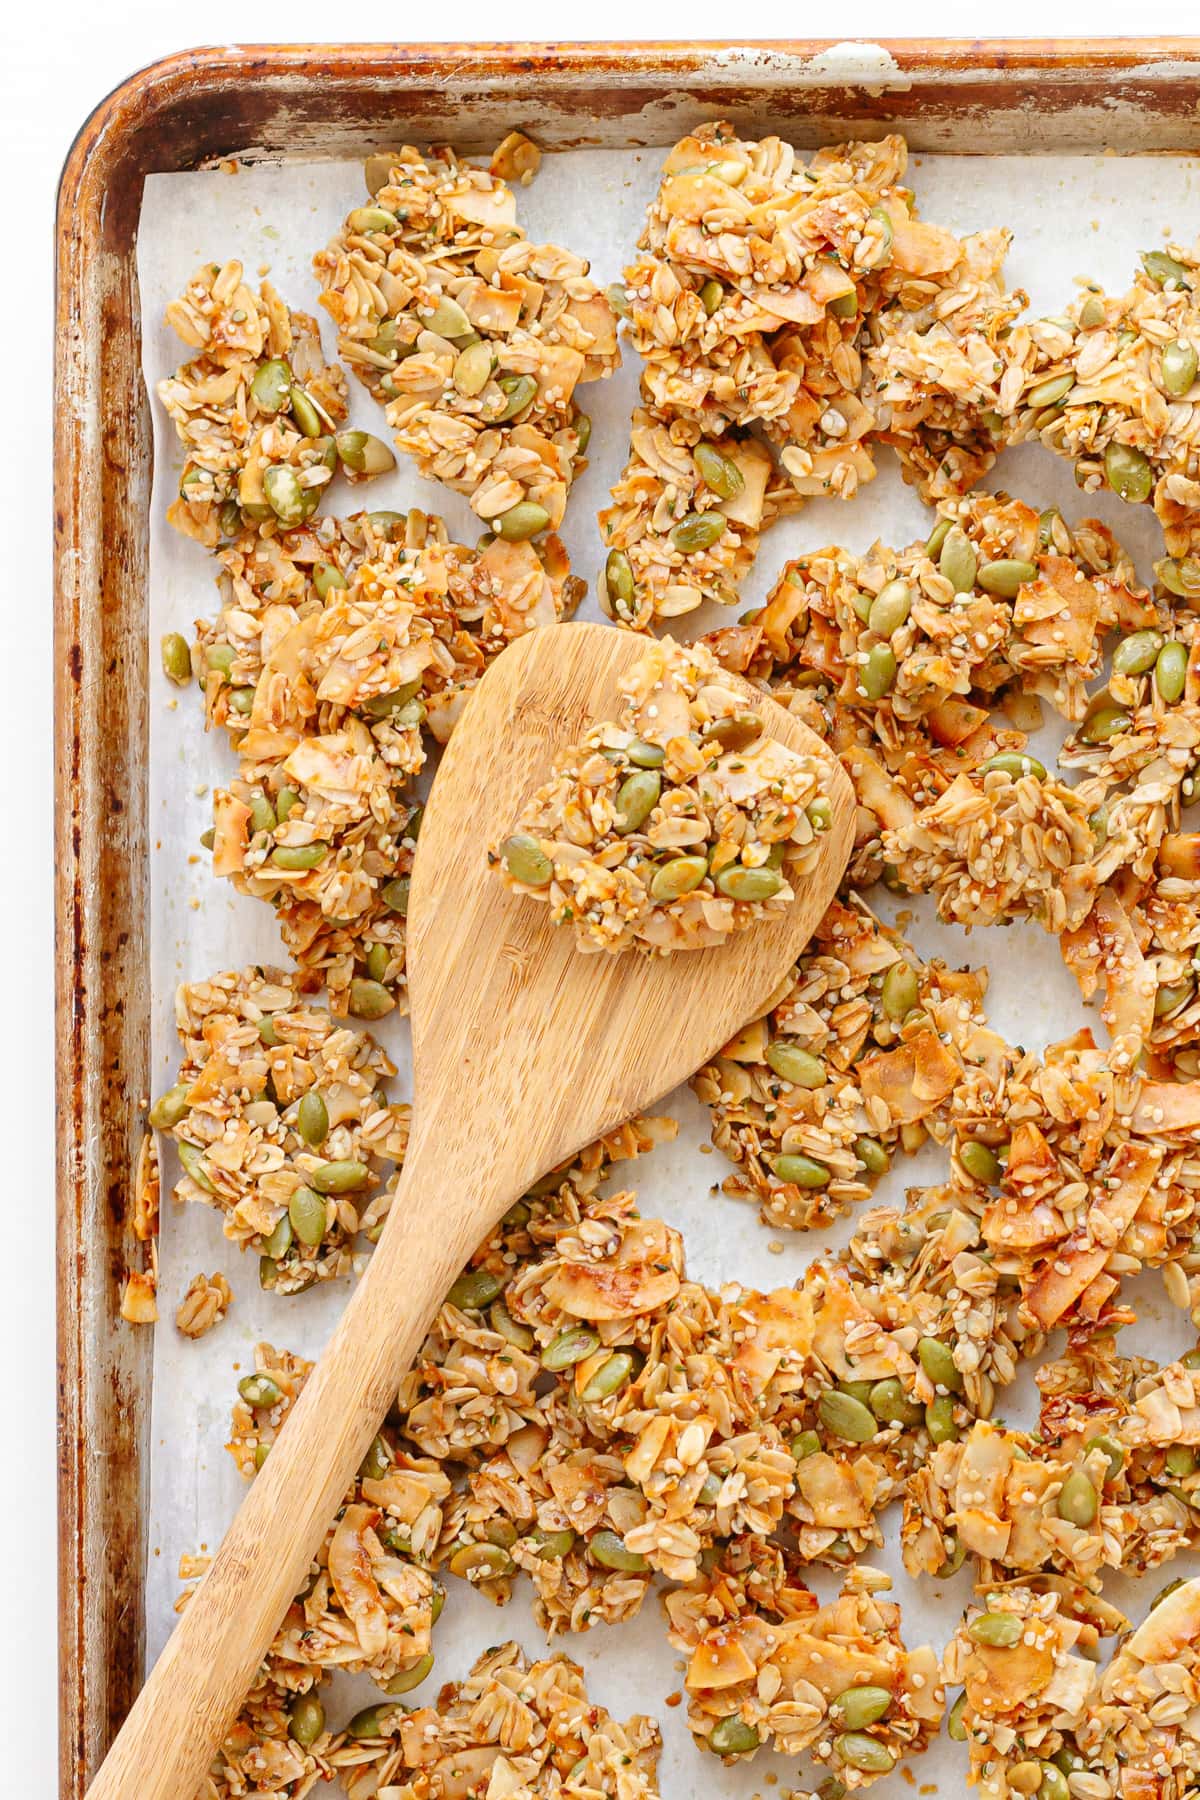 Granola clusters on baking sheet with wooden spoon.